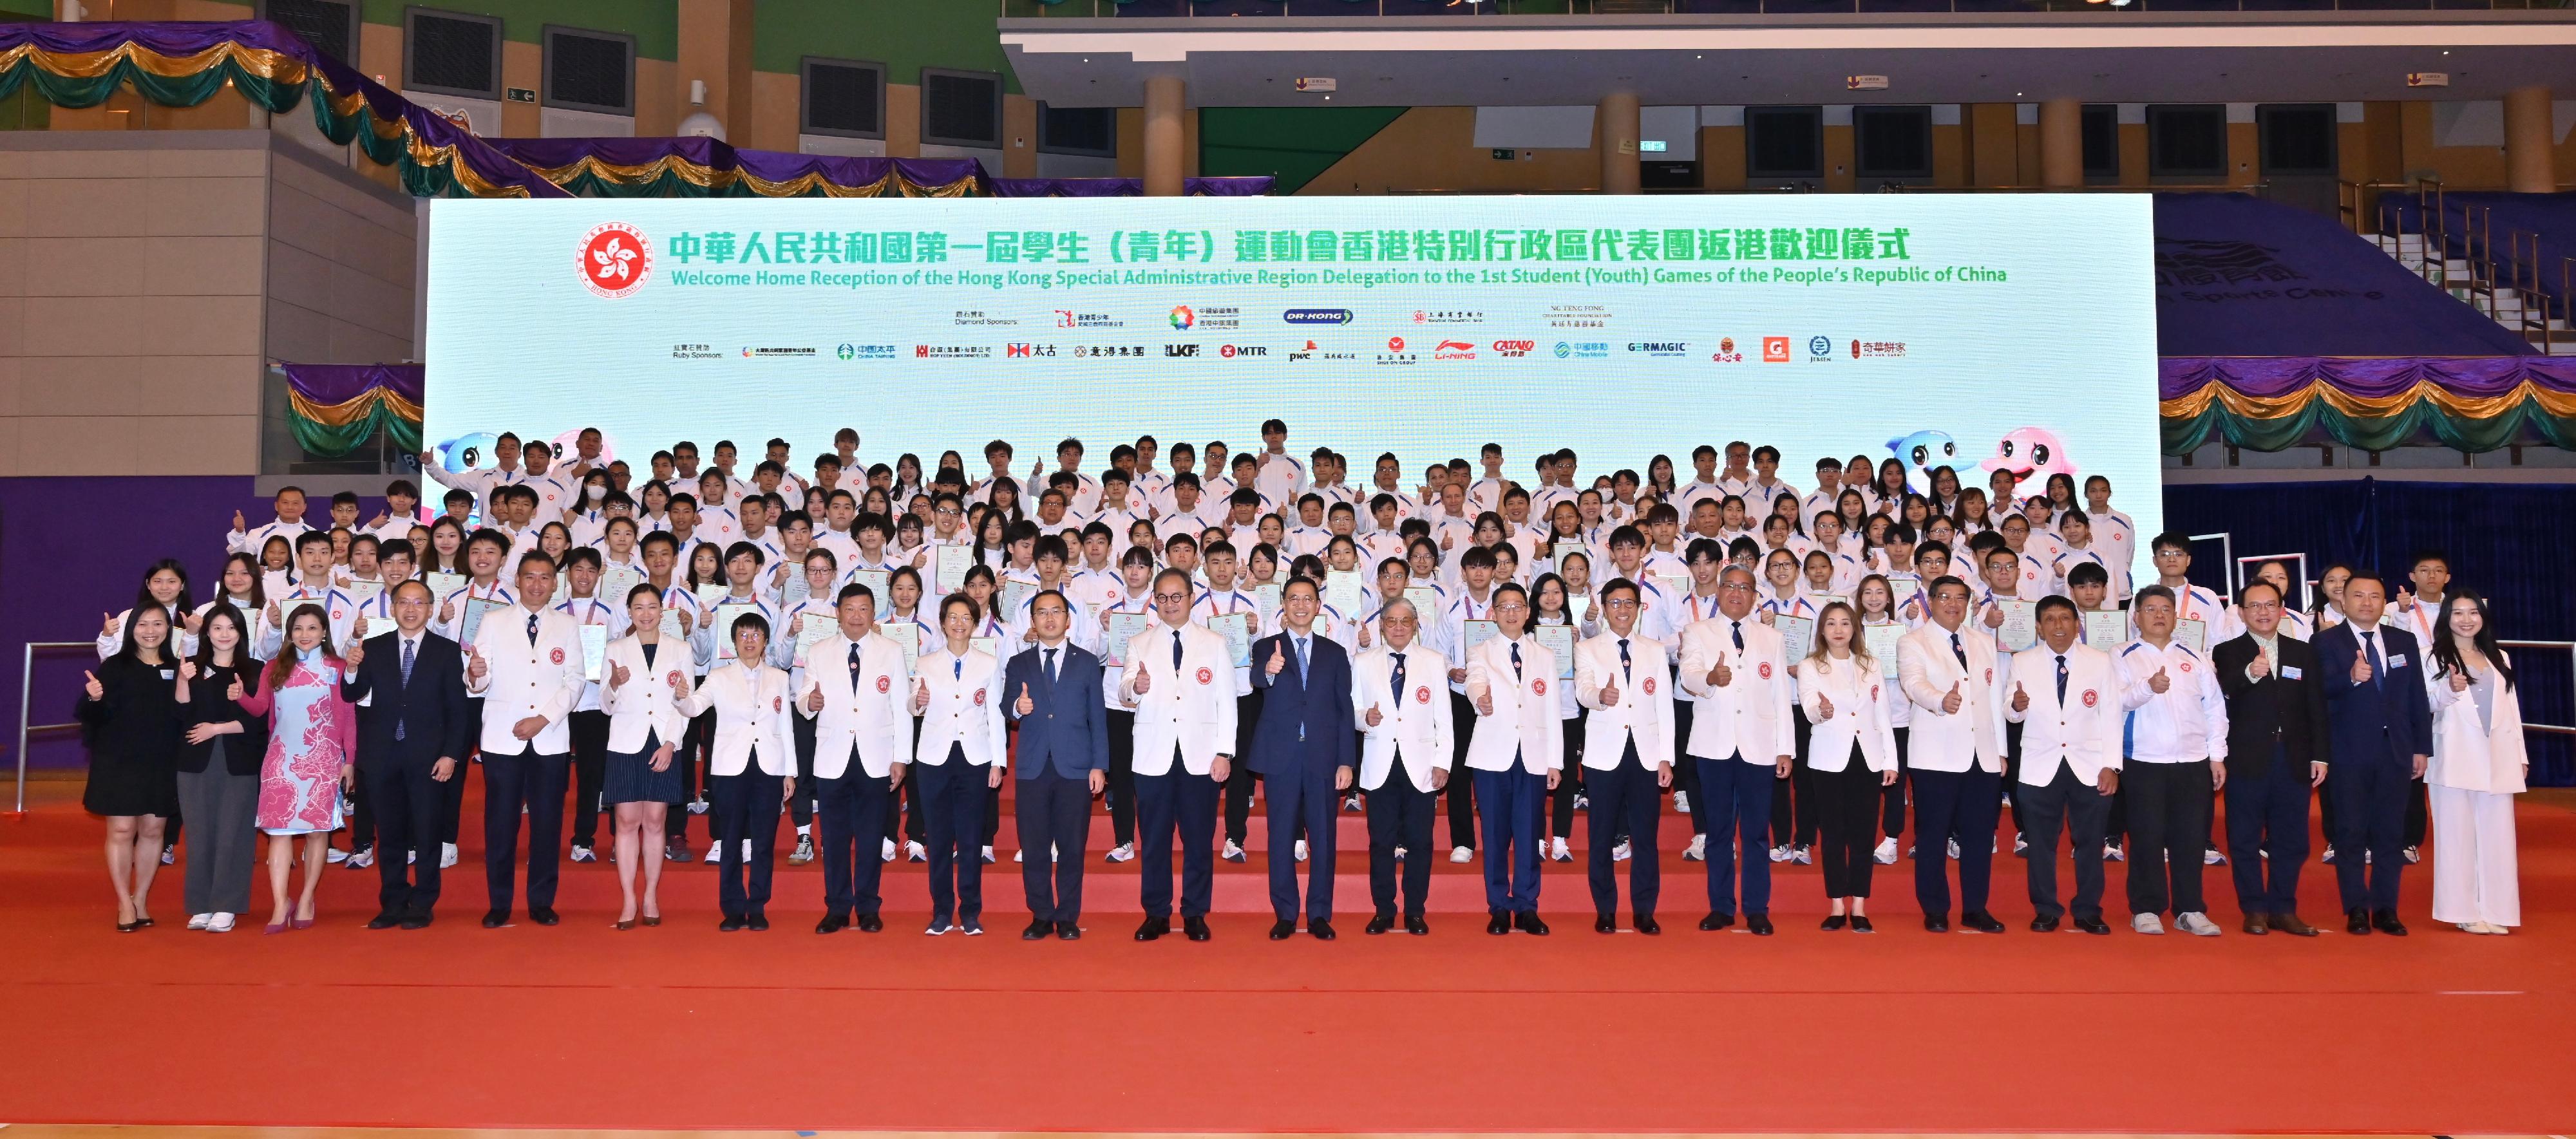 The Secretary for Culture, Sports and Tourism and the Chef de Mission of the Hong Kong Special Administrative Region (HKSAR) Delegation, Mr Kevin Yeung, officiated at the welcome home reception for the Delegation to the 1st National Student (Youth) Games at Ma On Shan Sports Centre, Sha Tin today (December 16). Photo shows (front row, from eighth right) the Chairman of the Executive Committee of the Delegation, Mr Cheng King-leung; the Commissioner for Sports and member of the Organising Committee of the Delegation, Mr Sam Wong; the Director of Leisure and Cultural Services and Deputy De Mission of the Delegation, Mr Vincent Liu; the President of the Sports Federation & Olympic Committee of Hong Kong, China and the Chairman of the Organising Committee of the Delegation, Mr Timothy Fok; Mr Yeung; the Permanent Secretary for Culture, Sports and Tourism and Honorary Adviser of the Delegation, Mr Joe Wong; the Head of Sports Section of the Department of Publicity, Cultural and Sports Affairs of the Liaison Office of the Central People’s Government in the HKSAR, Mr Zhu Jianping; the Deputy Director of Leisure and Cultural Services (Leisure Services) and member of the Organising Committee of the Delegation, Miss Winnie Chui, and other guests with athletes.